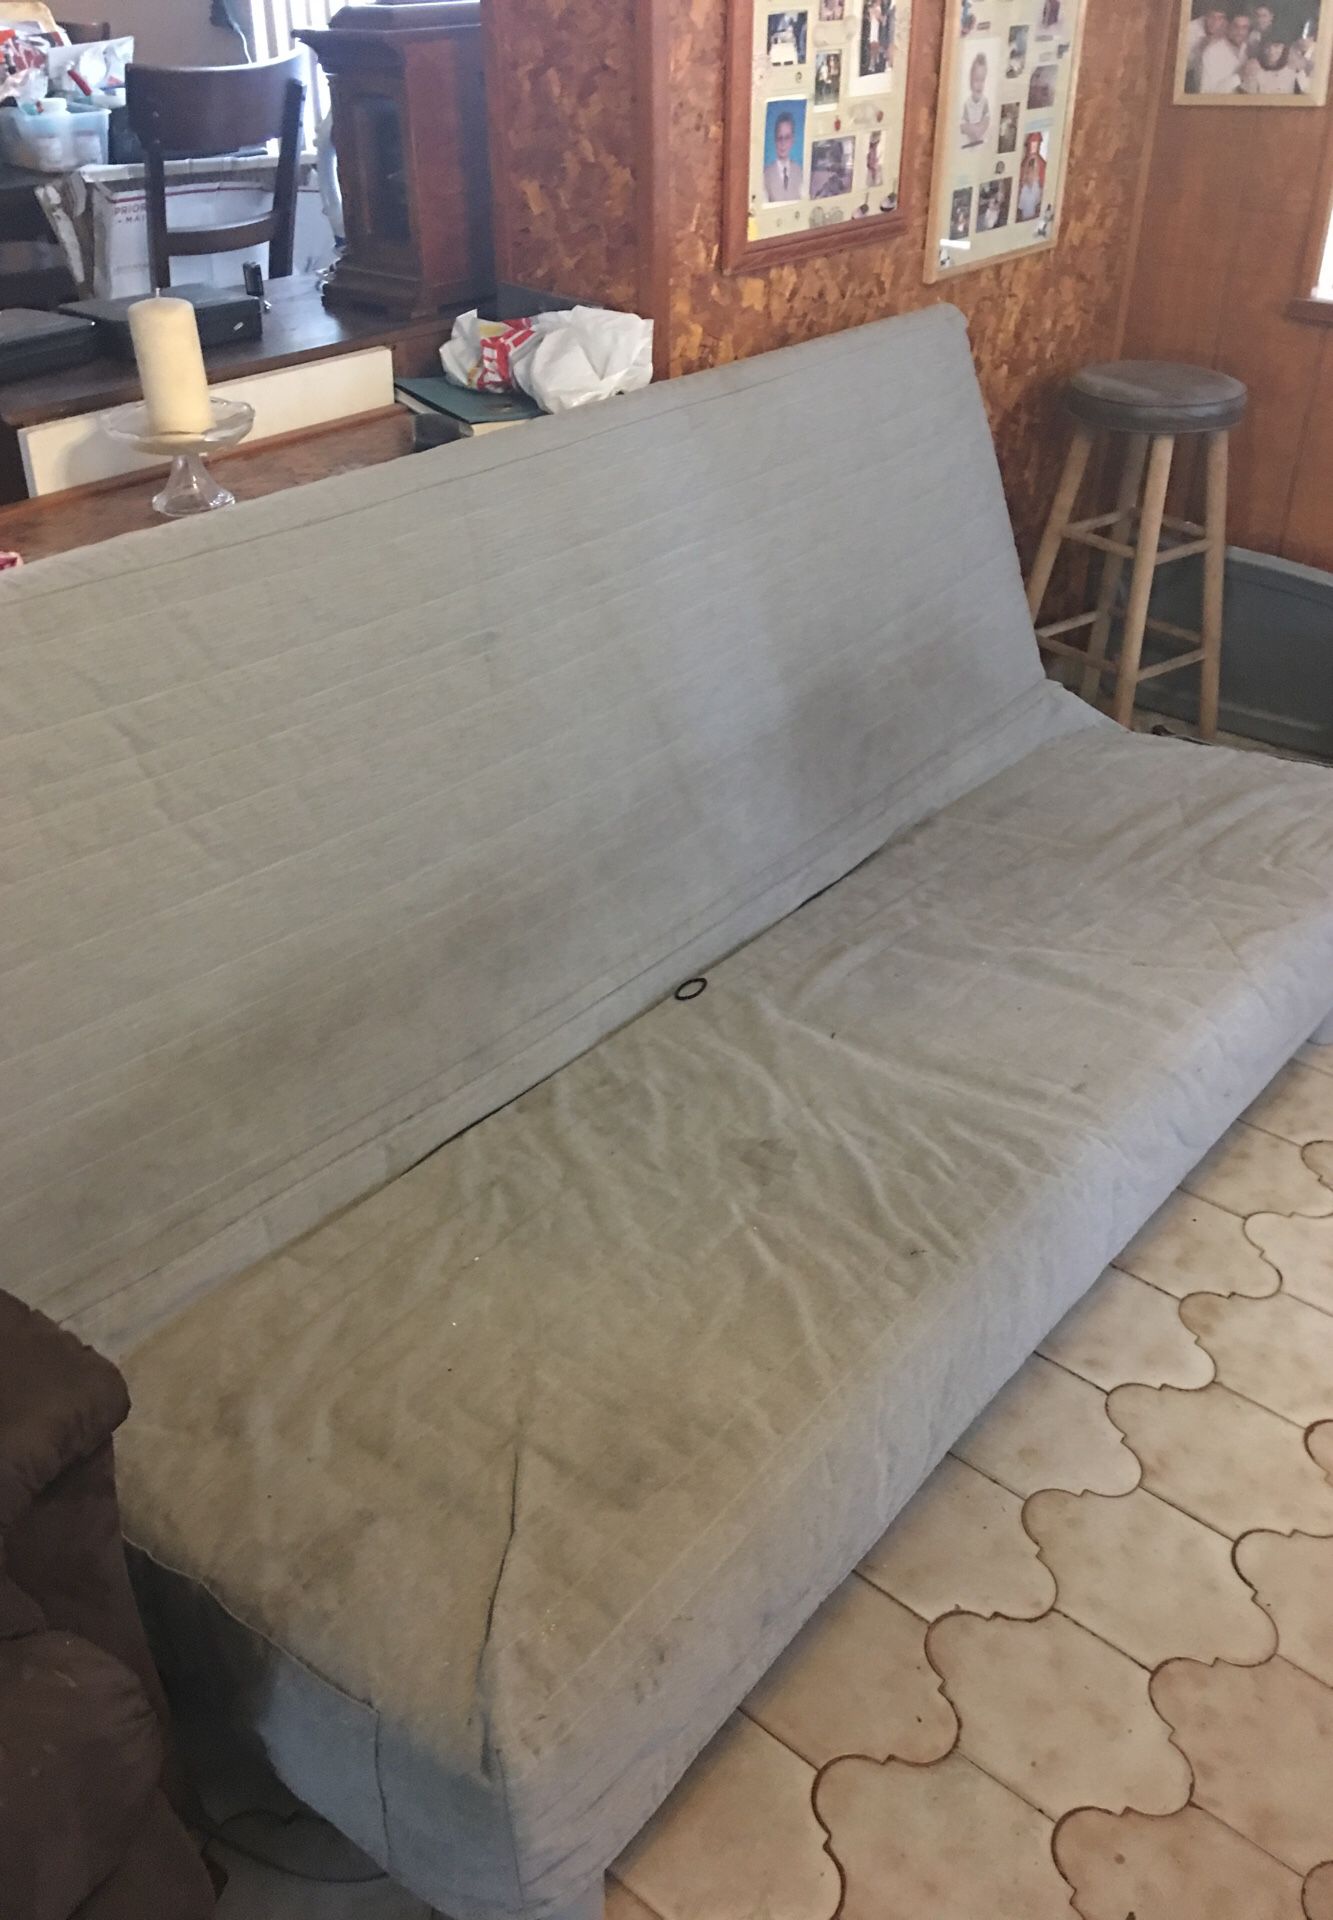 Two ikea futons for sale the picture shows one but they are both identical